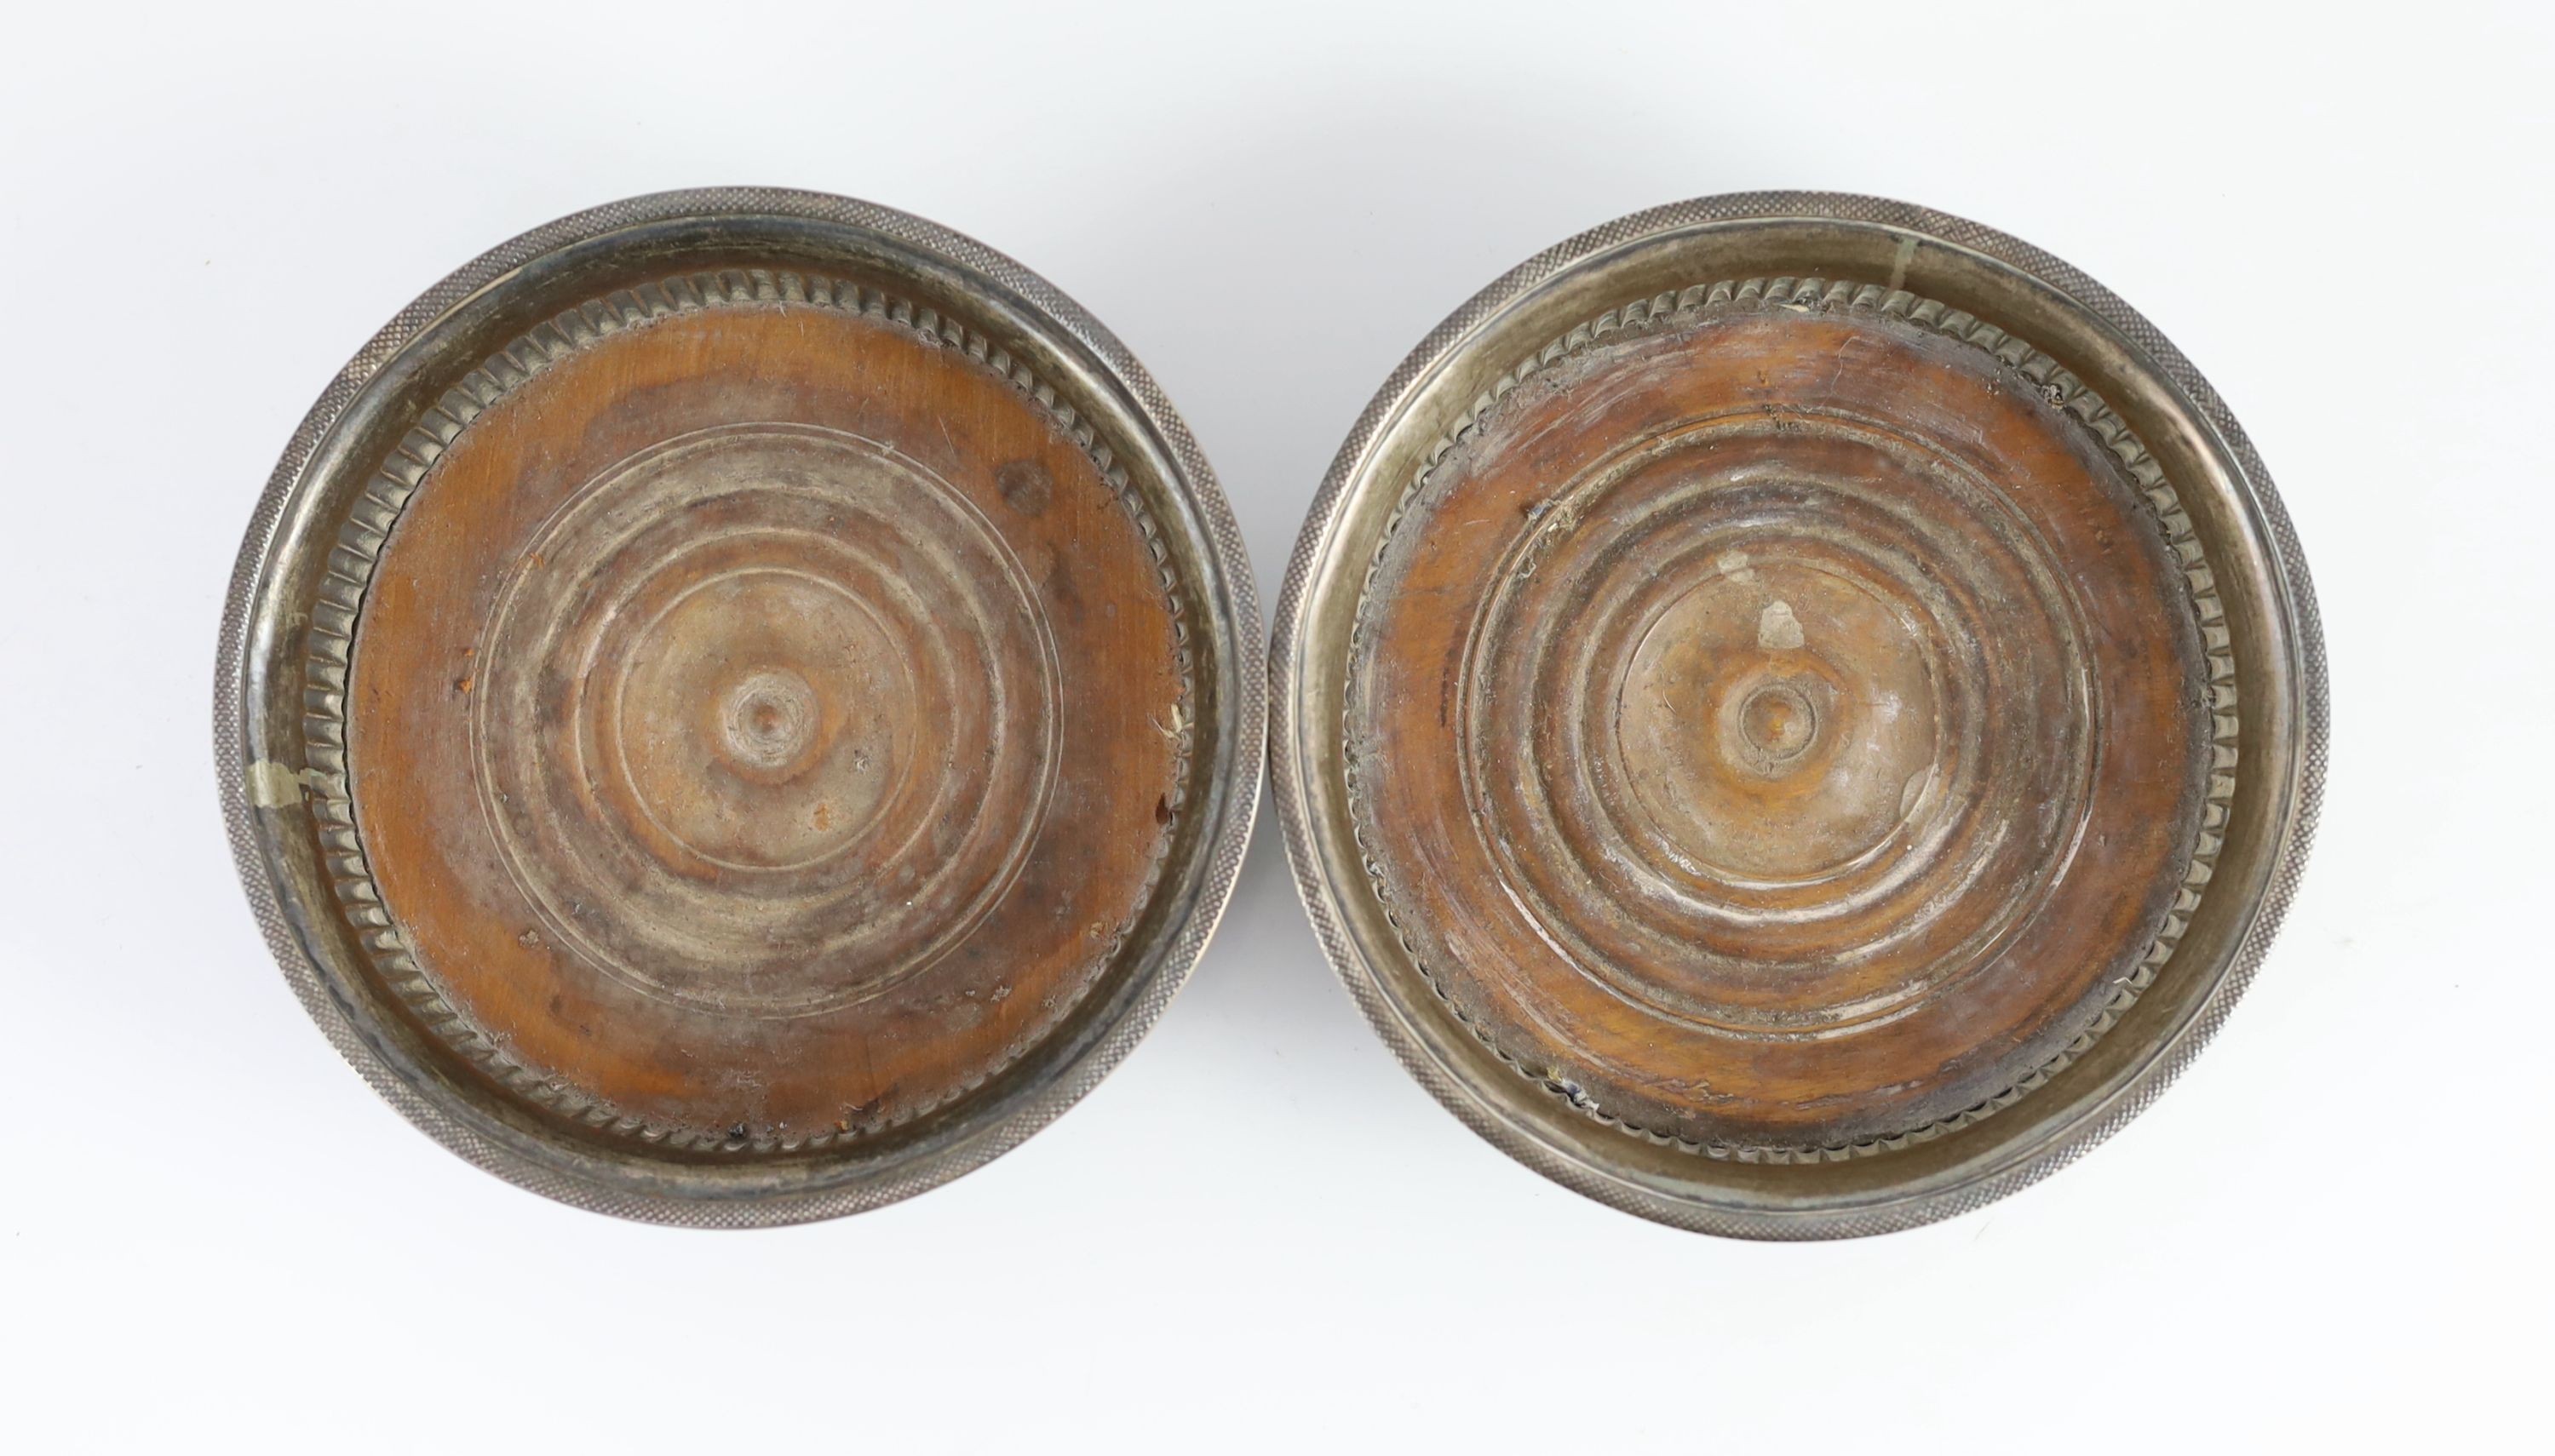 A matched pair of George III silver mounted wine coasters, one by John Love & Co, Sheffield circa 1790, the other by John Roberts & Co, Sheffield, 1807